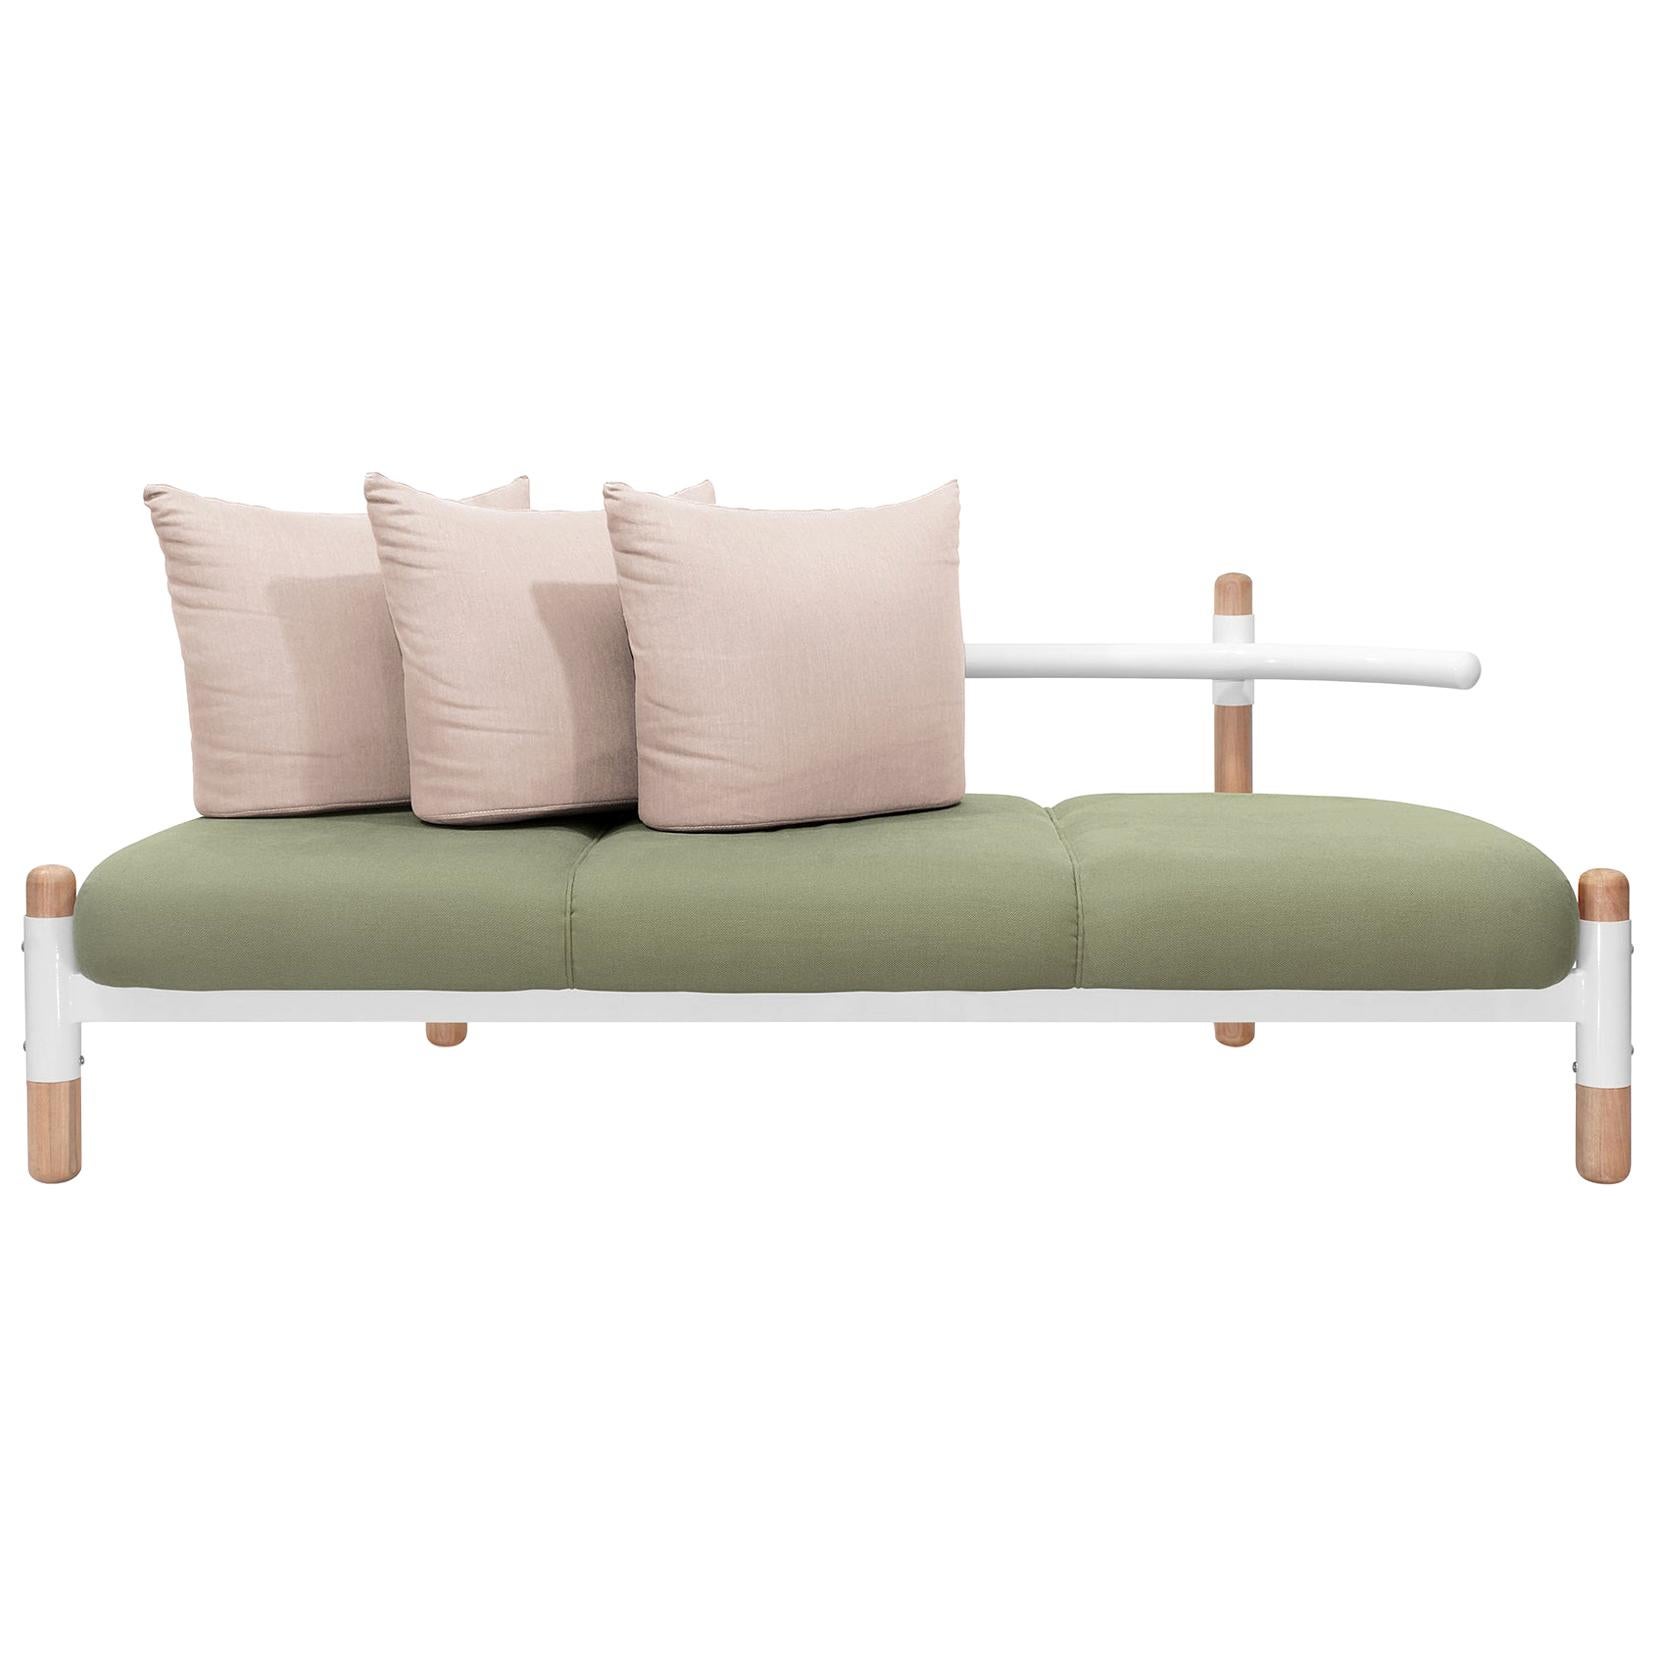 Green PK15 Three-Seat Sofa, Carbon Steel Structure & Wood Legs by Paulo Kobylka For Sale